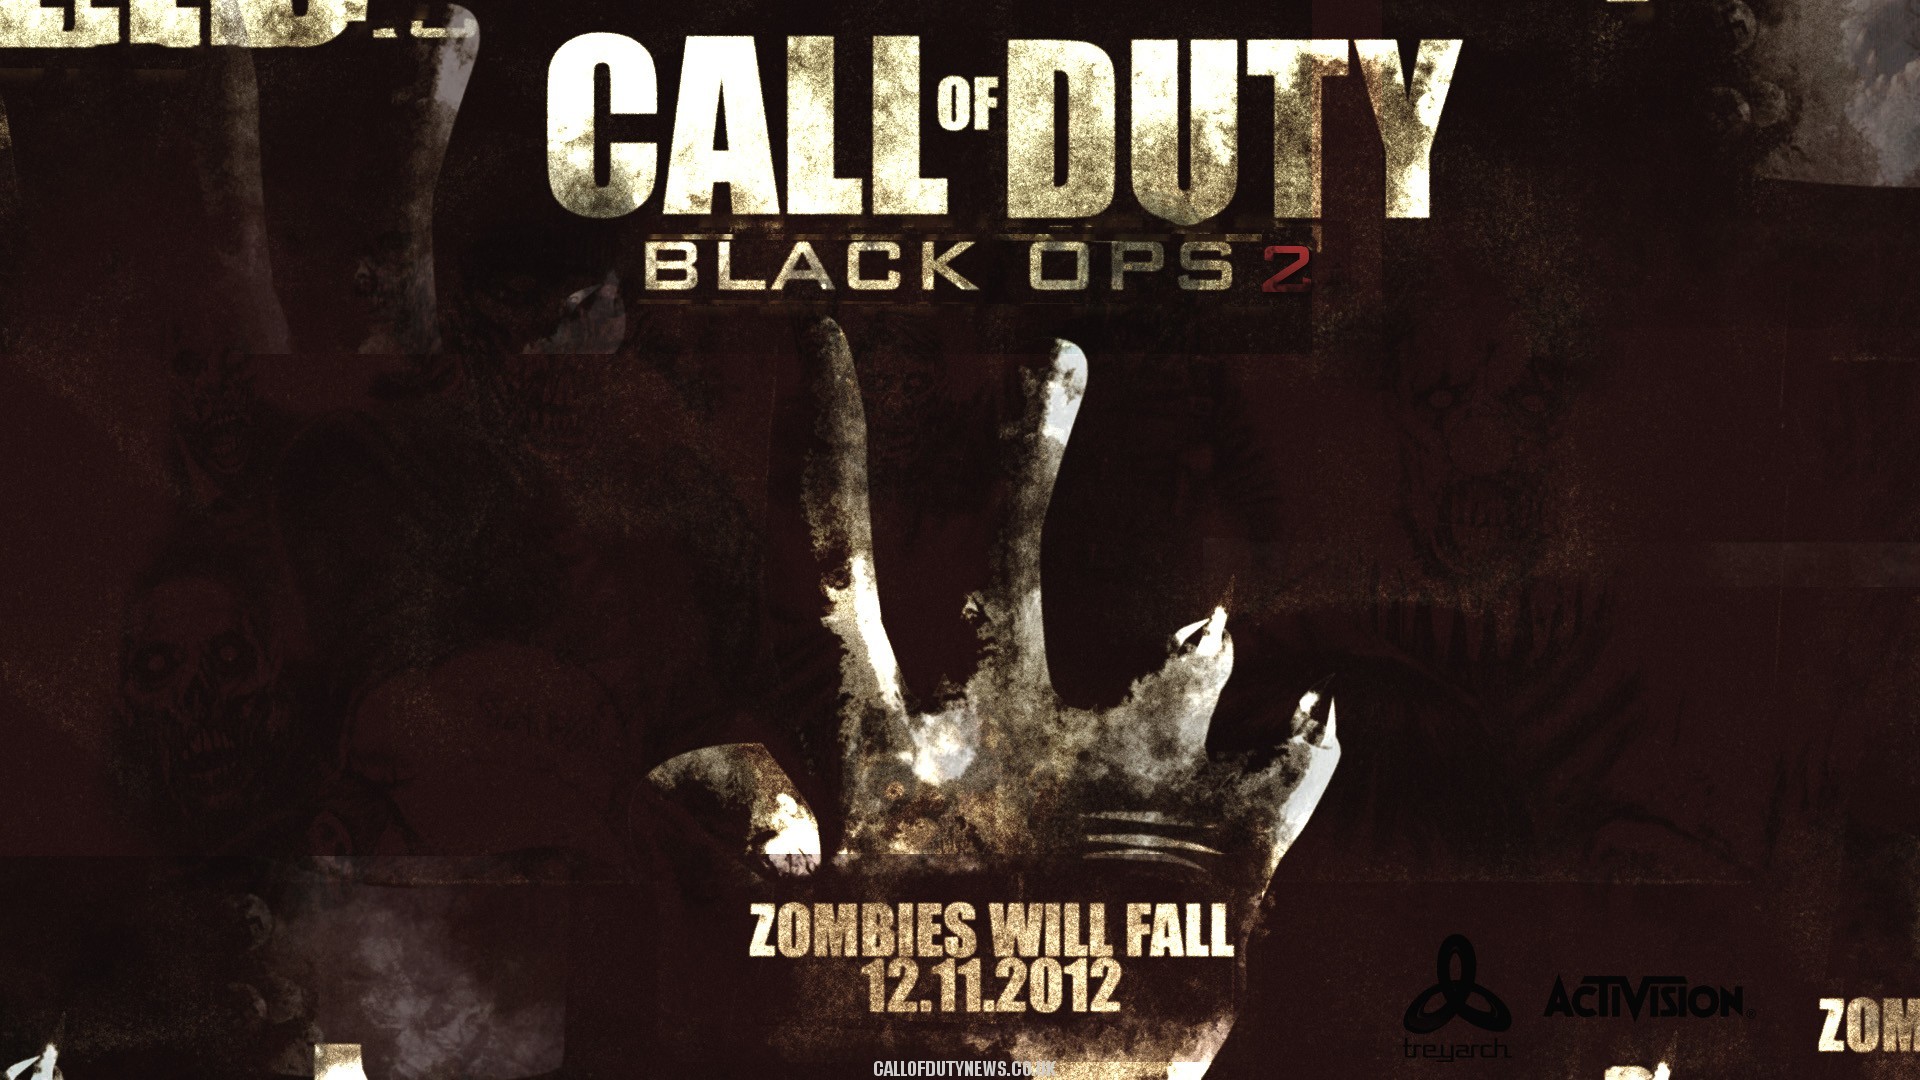 1920x1080 Call Of Duty Black Ops 2 Wallpaper For Android for Desktop .